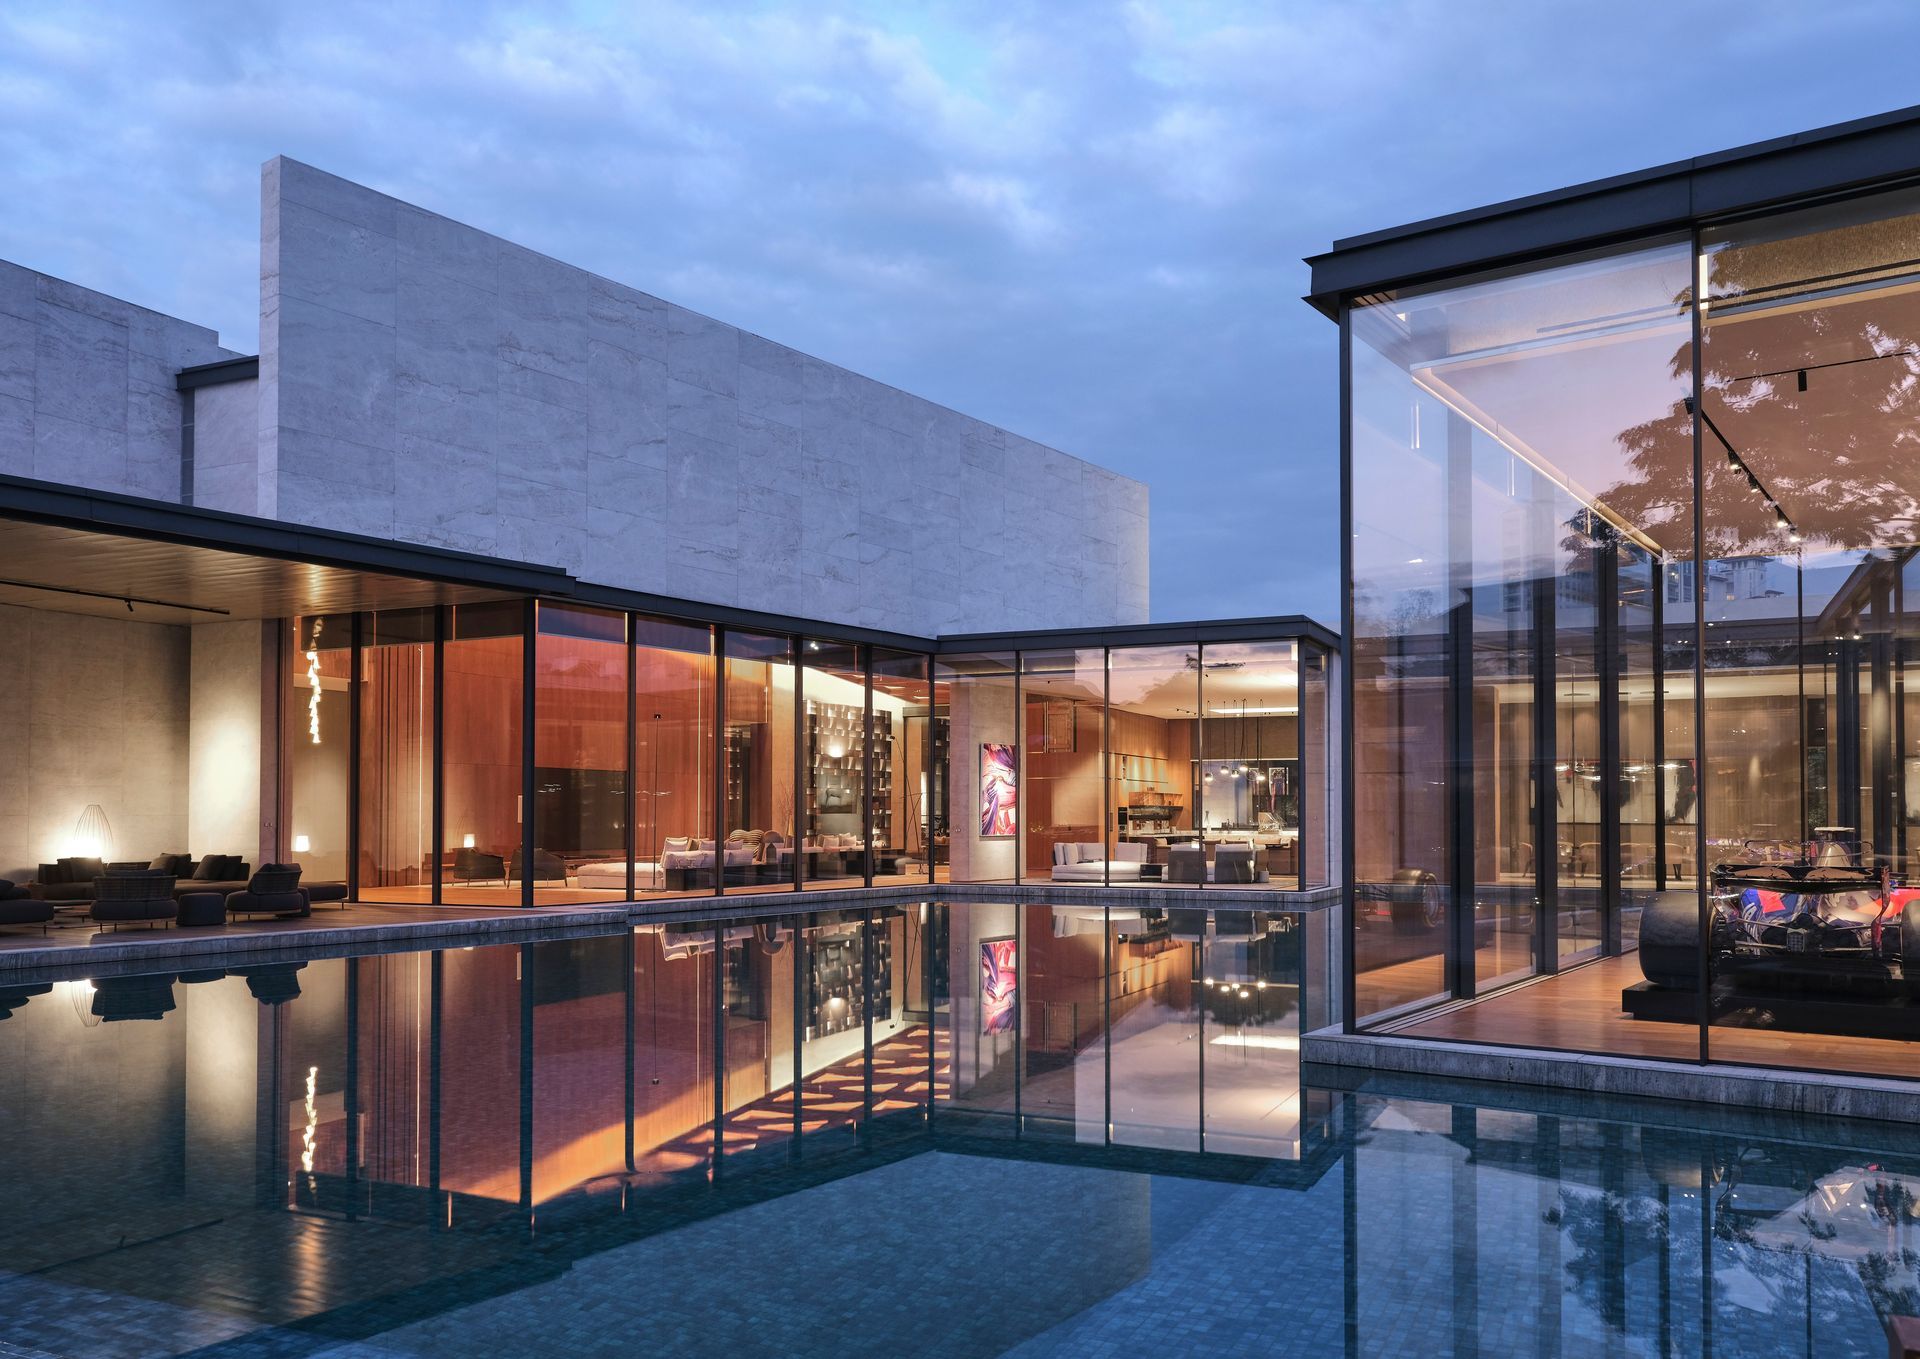 A sleek modern residence with OTIIMA expansive glass windows reflecting in a pool at dusk. The contemporary design is accentuated by warm interior lighting, offering a cozy and sophisticated view.